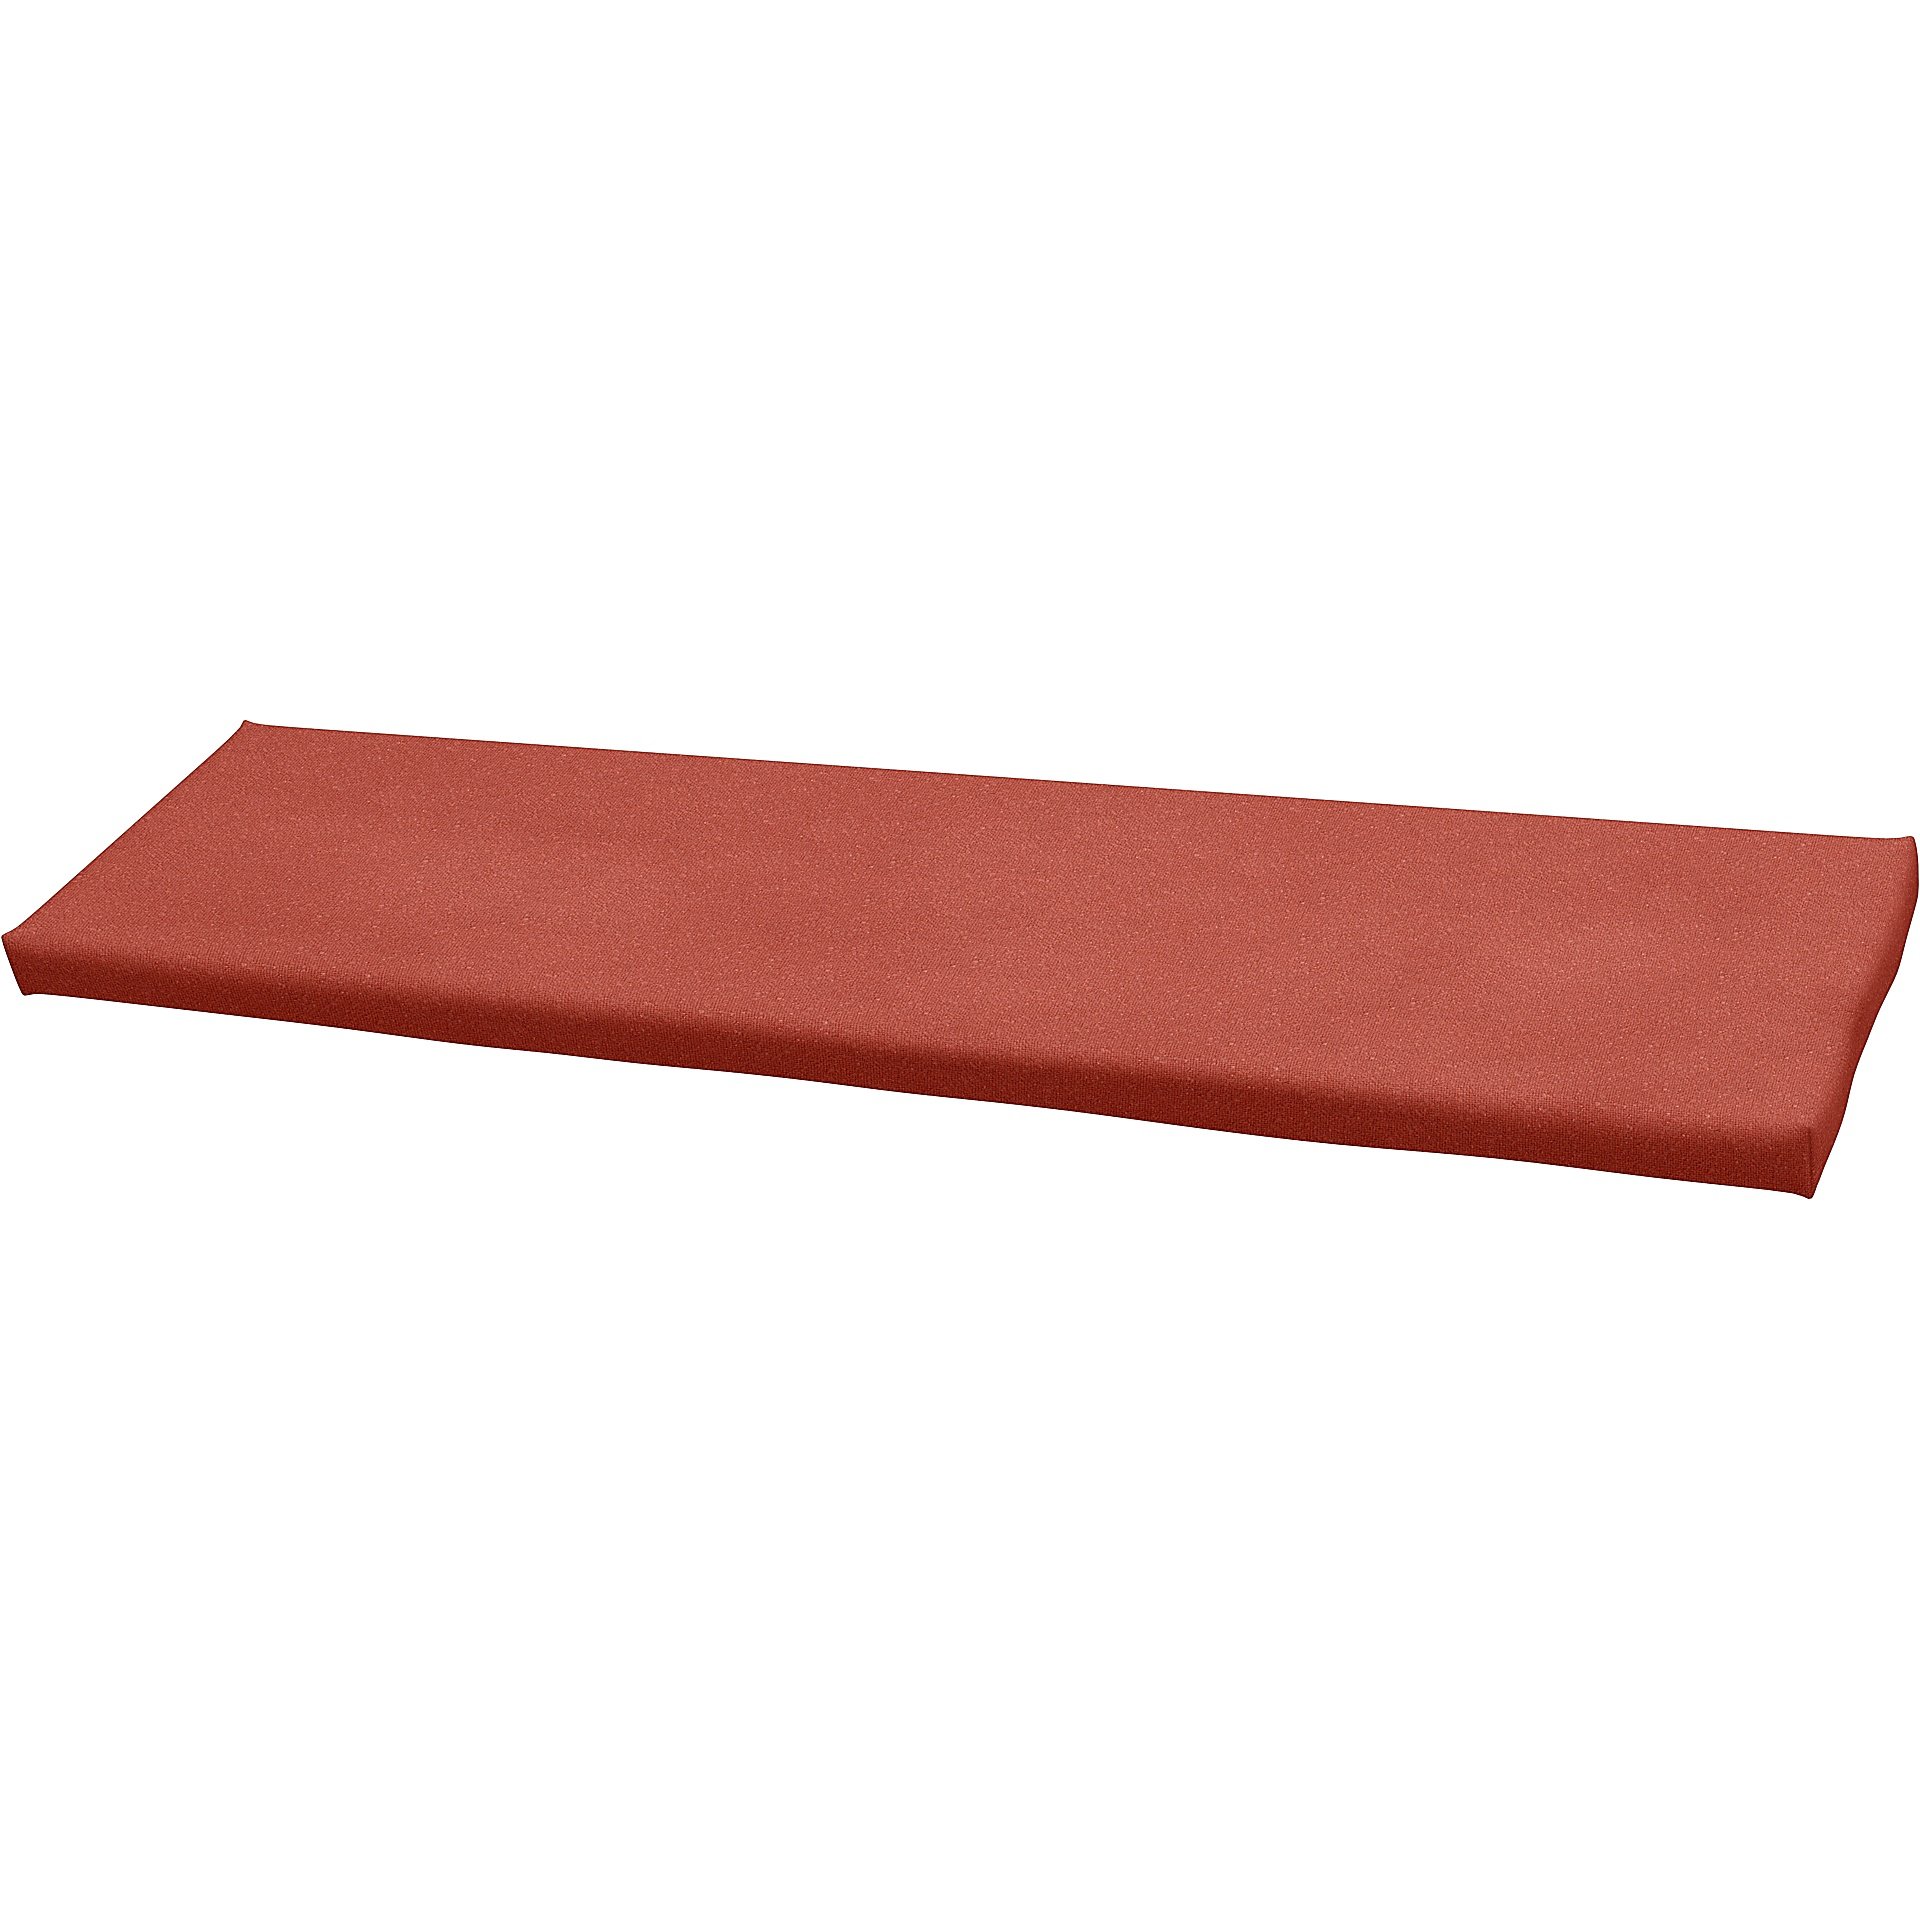 IKEA - Universal bench cushion cover 120x35x3,5 cm, Coral Red, Outdoor - Bemz